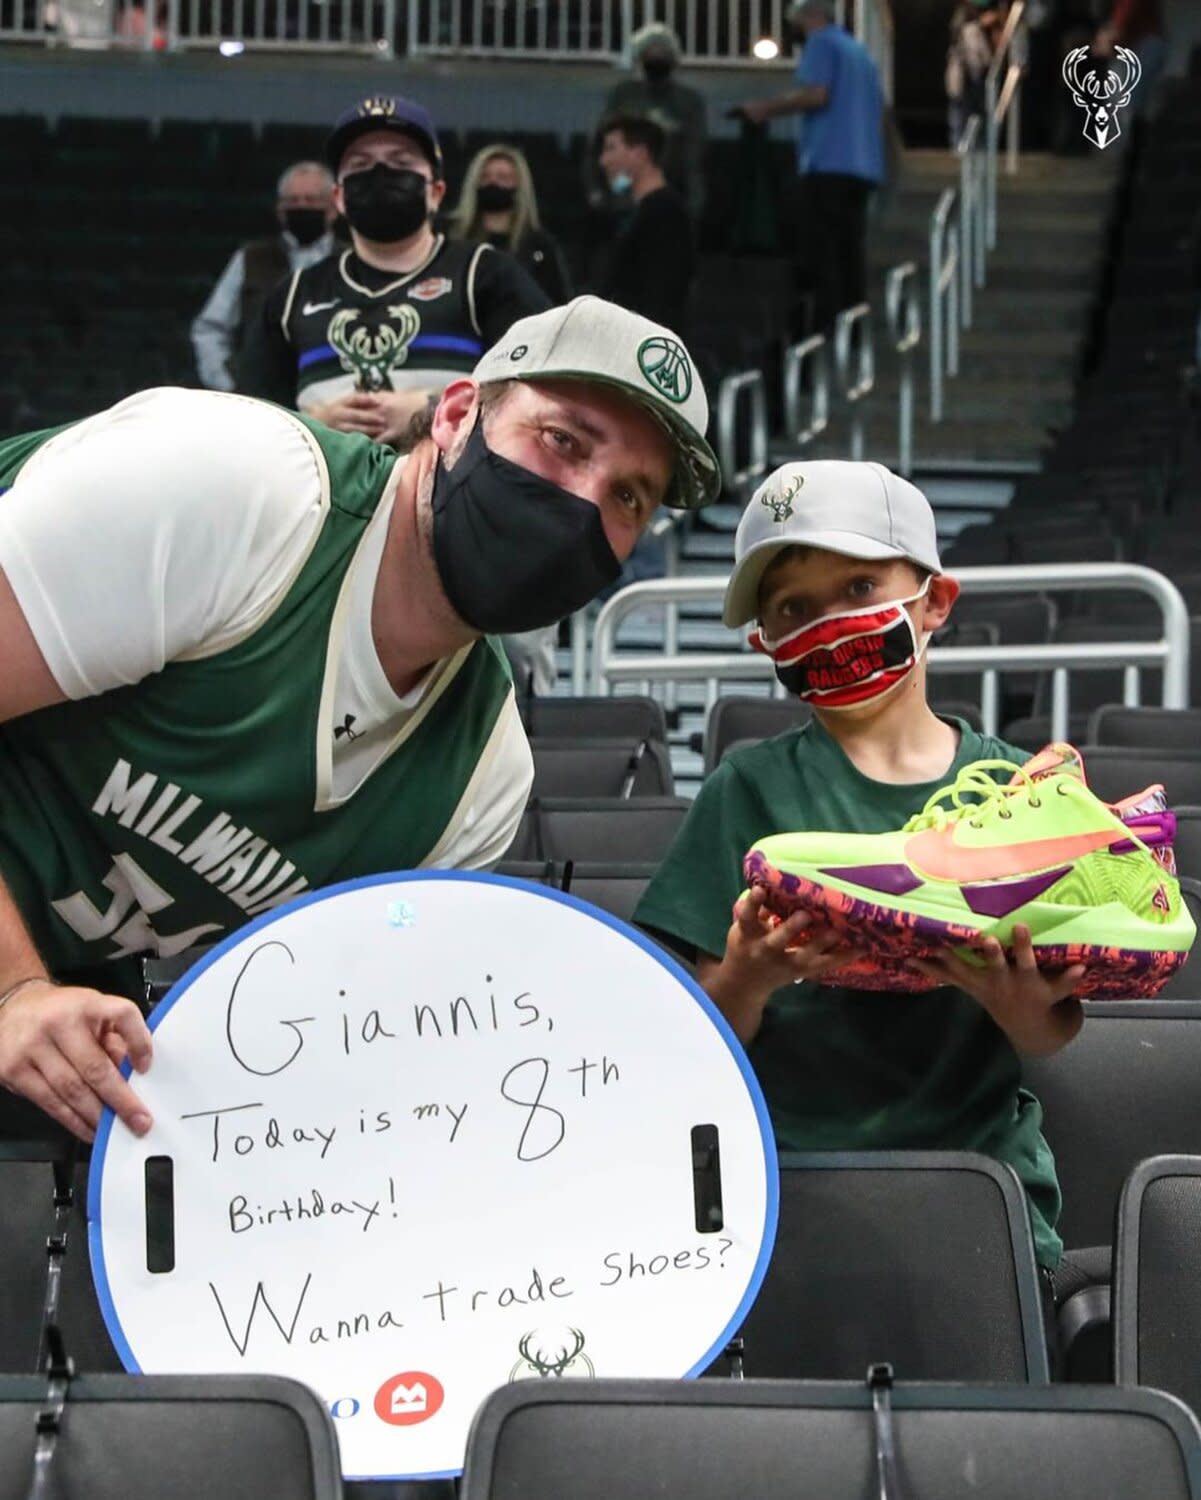 Giannis Antetokounmpo Gifts His Sneakers to 8-Year-Old Fan at Bucks Game